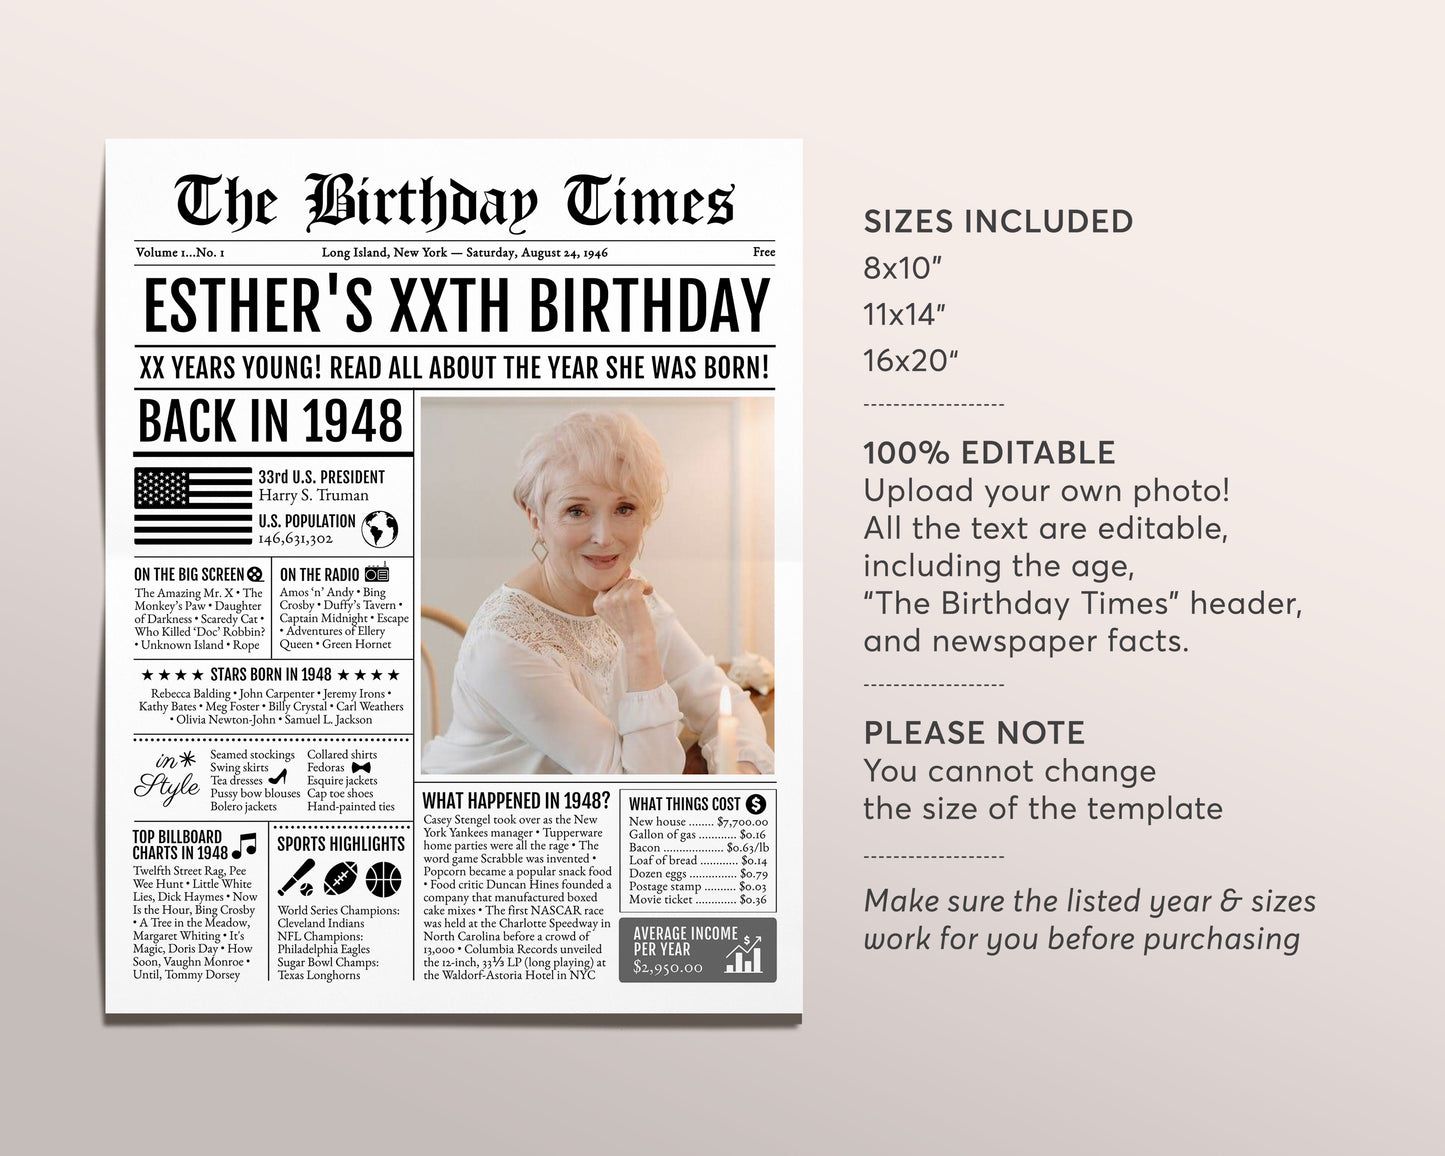 Back in 1948 Birthday Newspaper Editable Template, 75 76 77 Years Ago, 75th 76th 77th Birthday Sign Decorations Decor for Men or Women